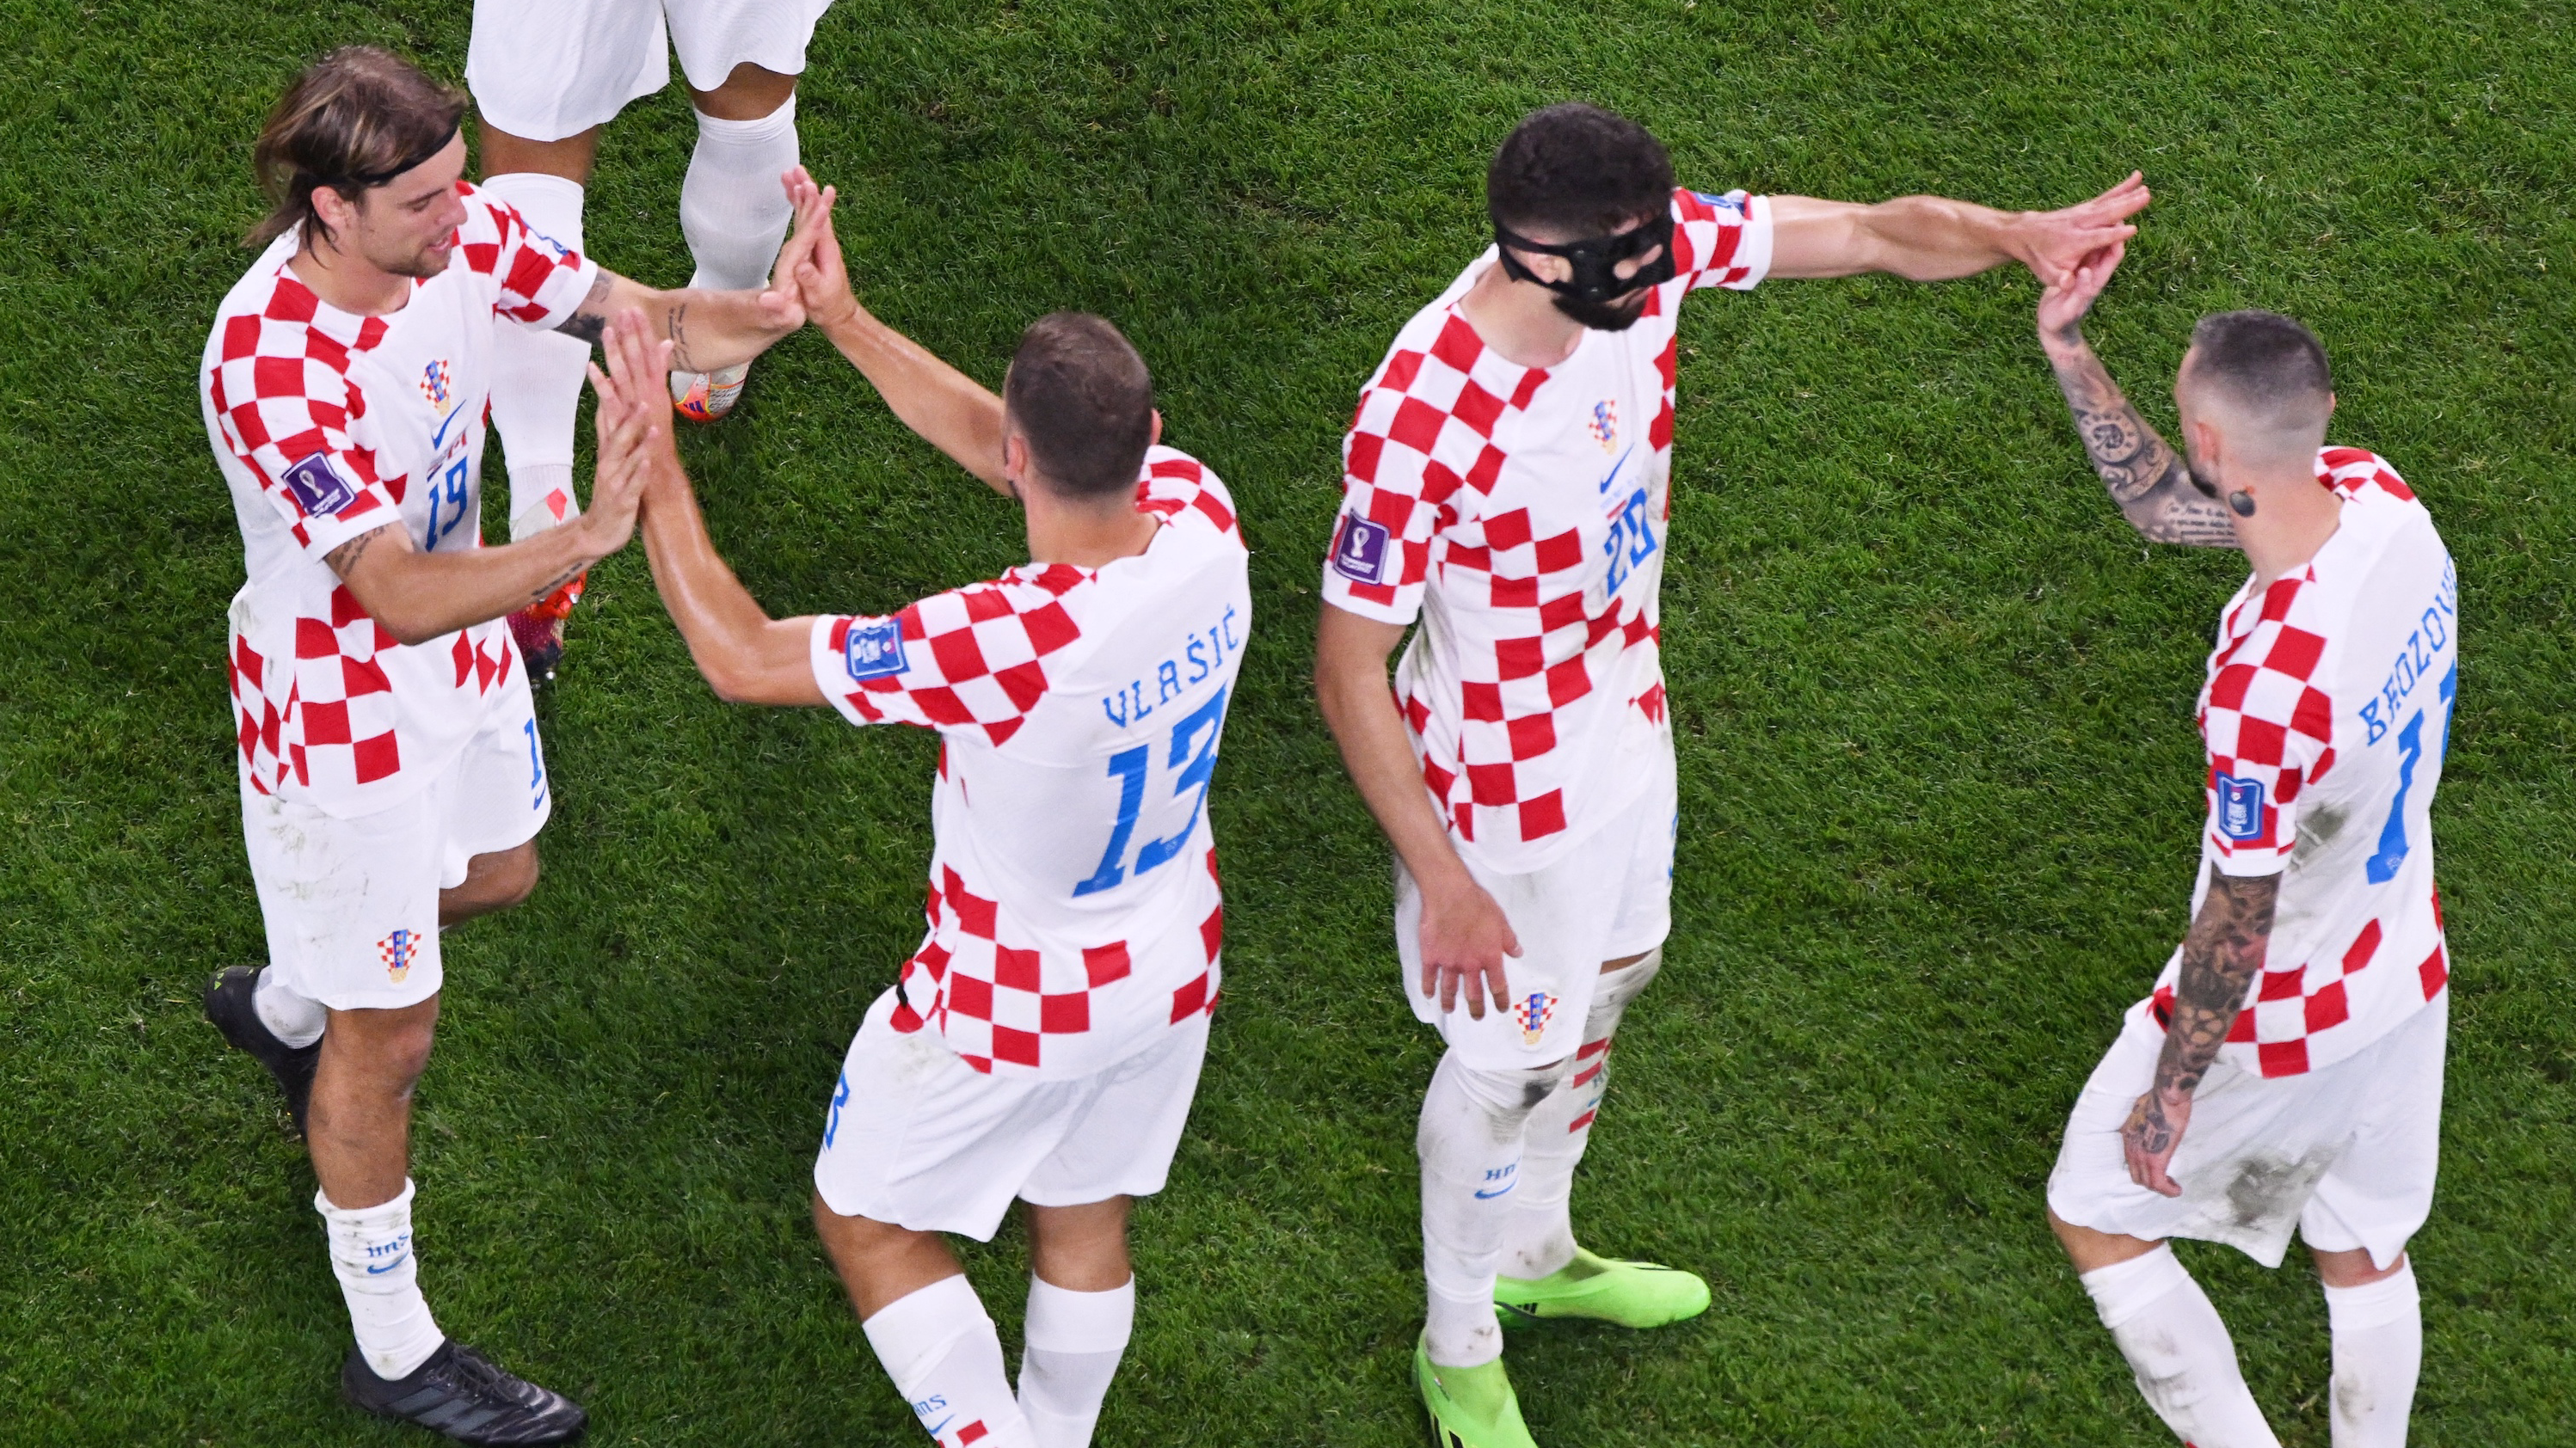 Croatia players celebrate after Croatia's midfielder #07 Lovro Majer (not seen) scored their team's fourth goal during the Qatar 2022 World Cup on November 27, 2022. /AFP